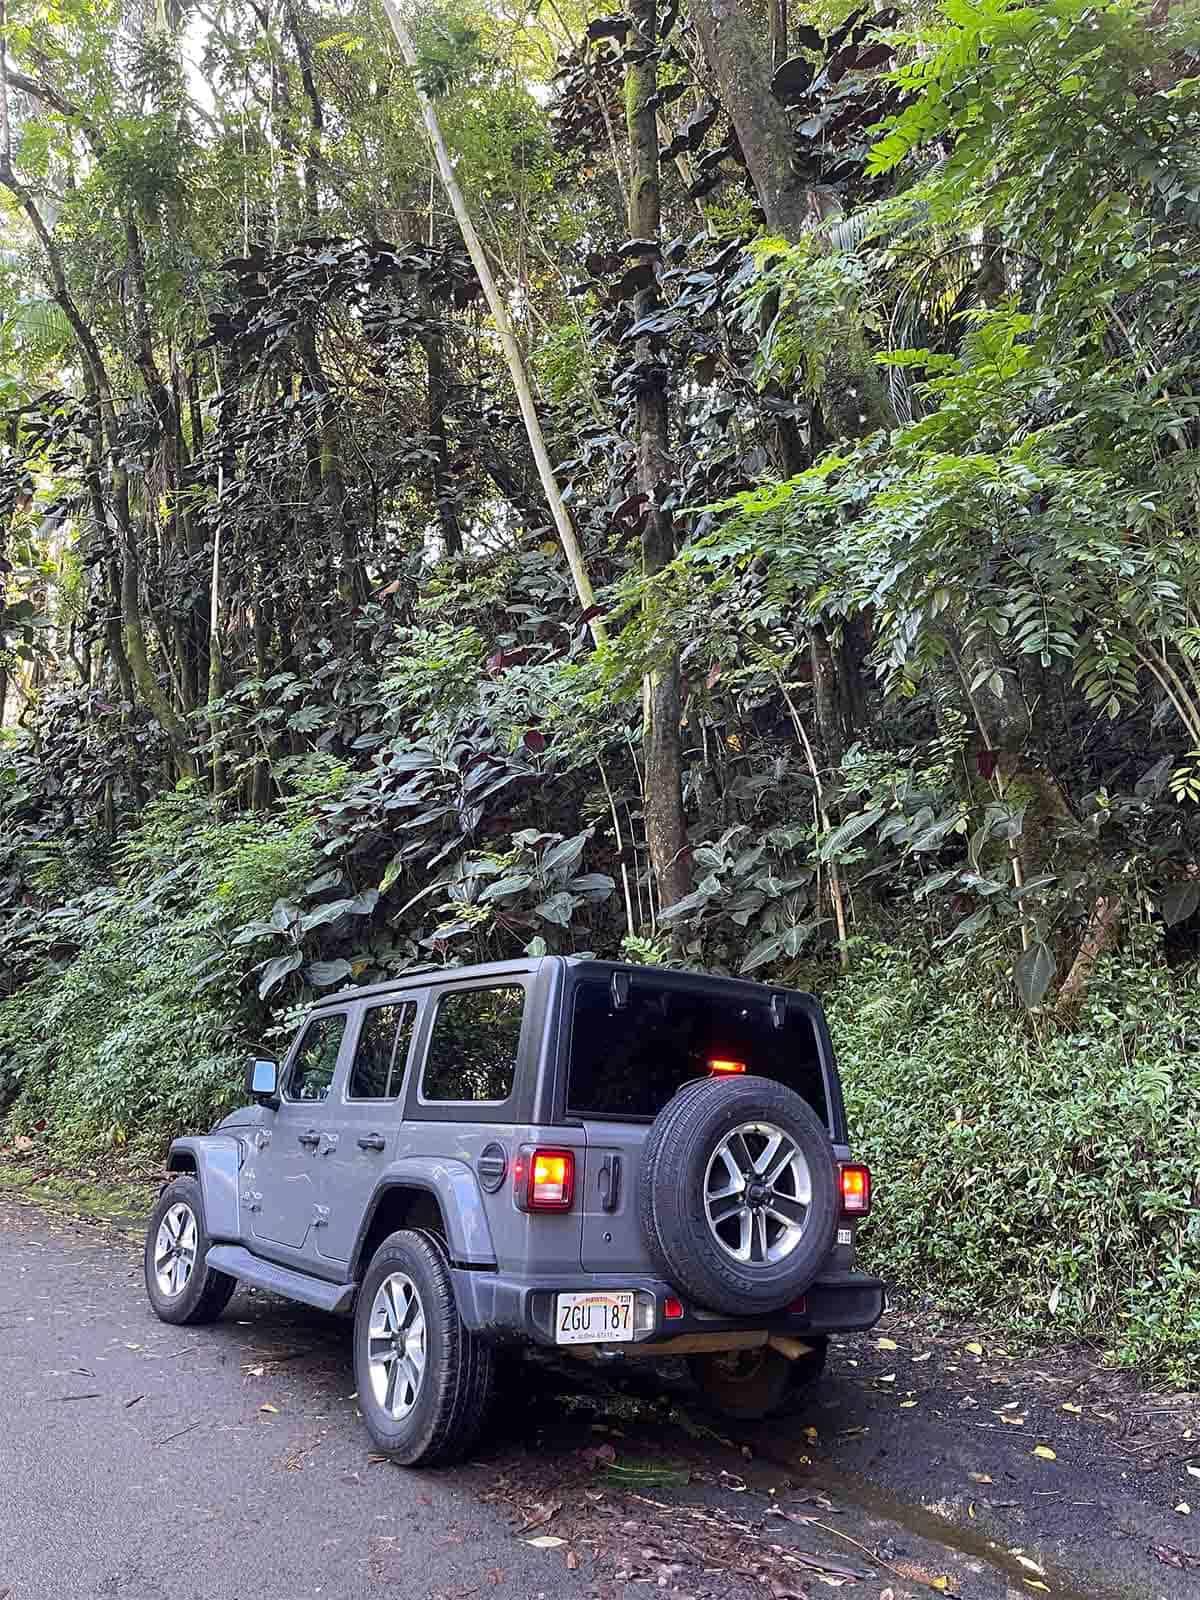 Our jeep in the forest.